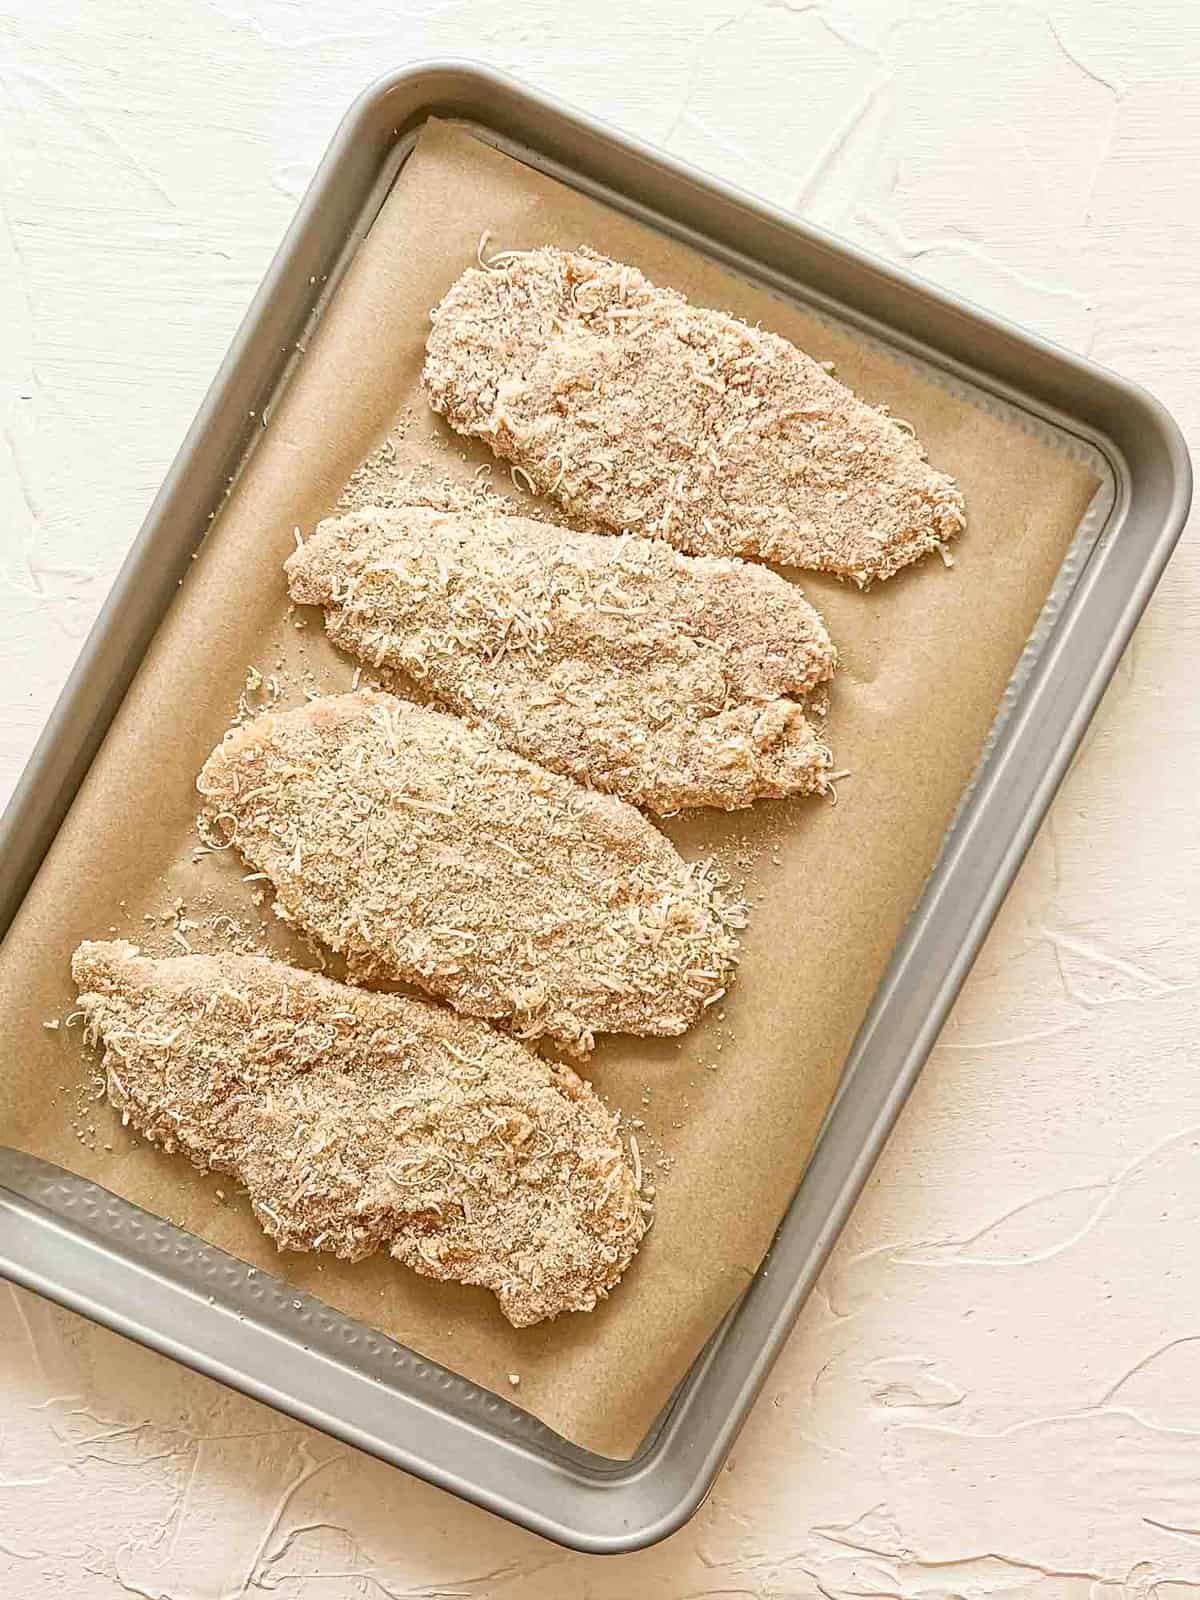 Raw breaded chicken breasts on baking sheet ready to be baked